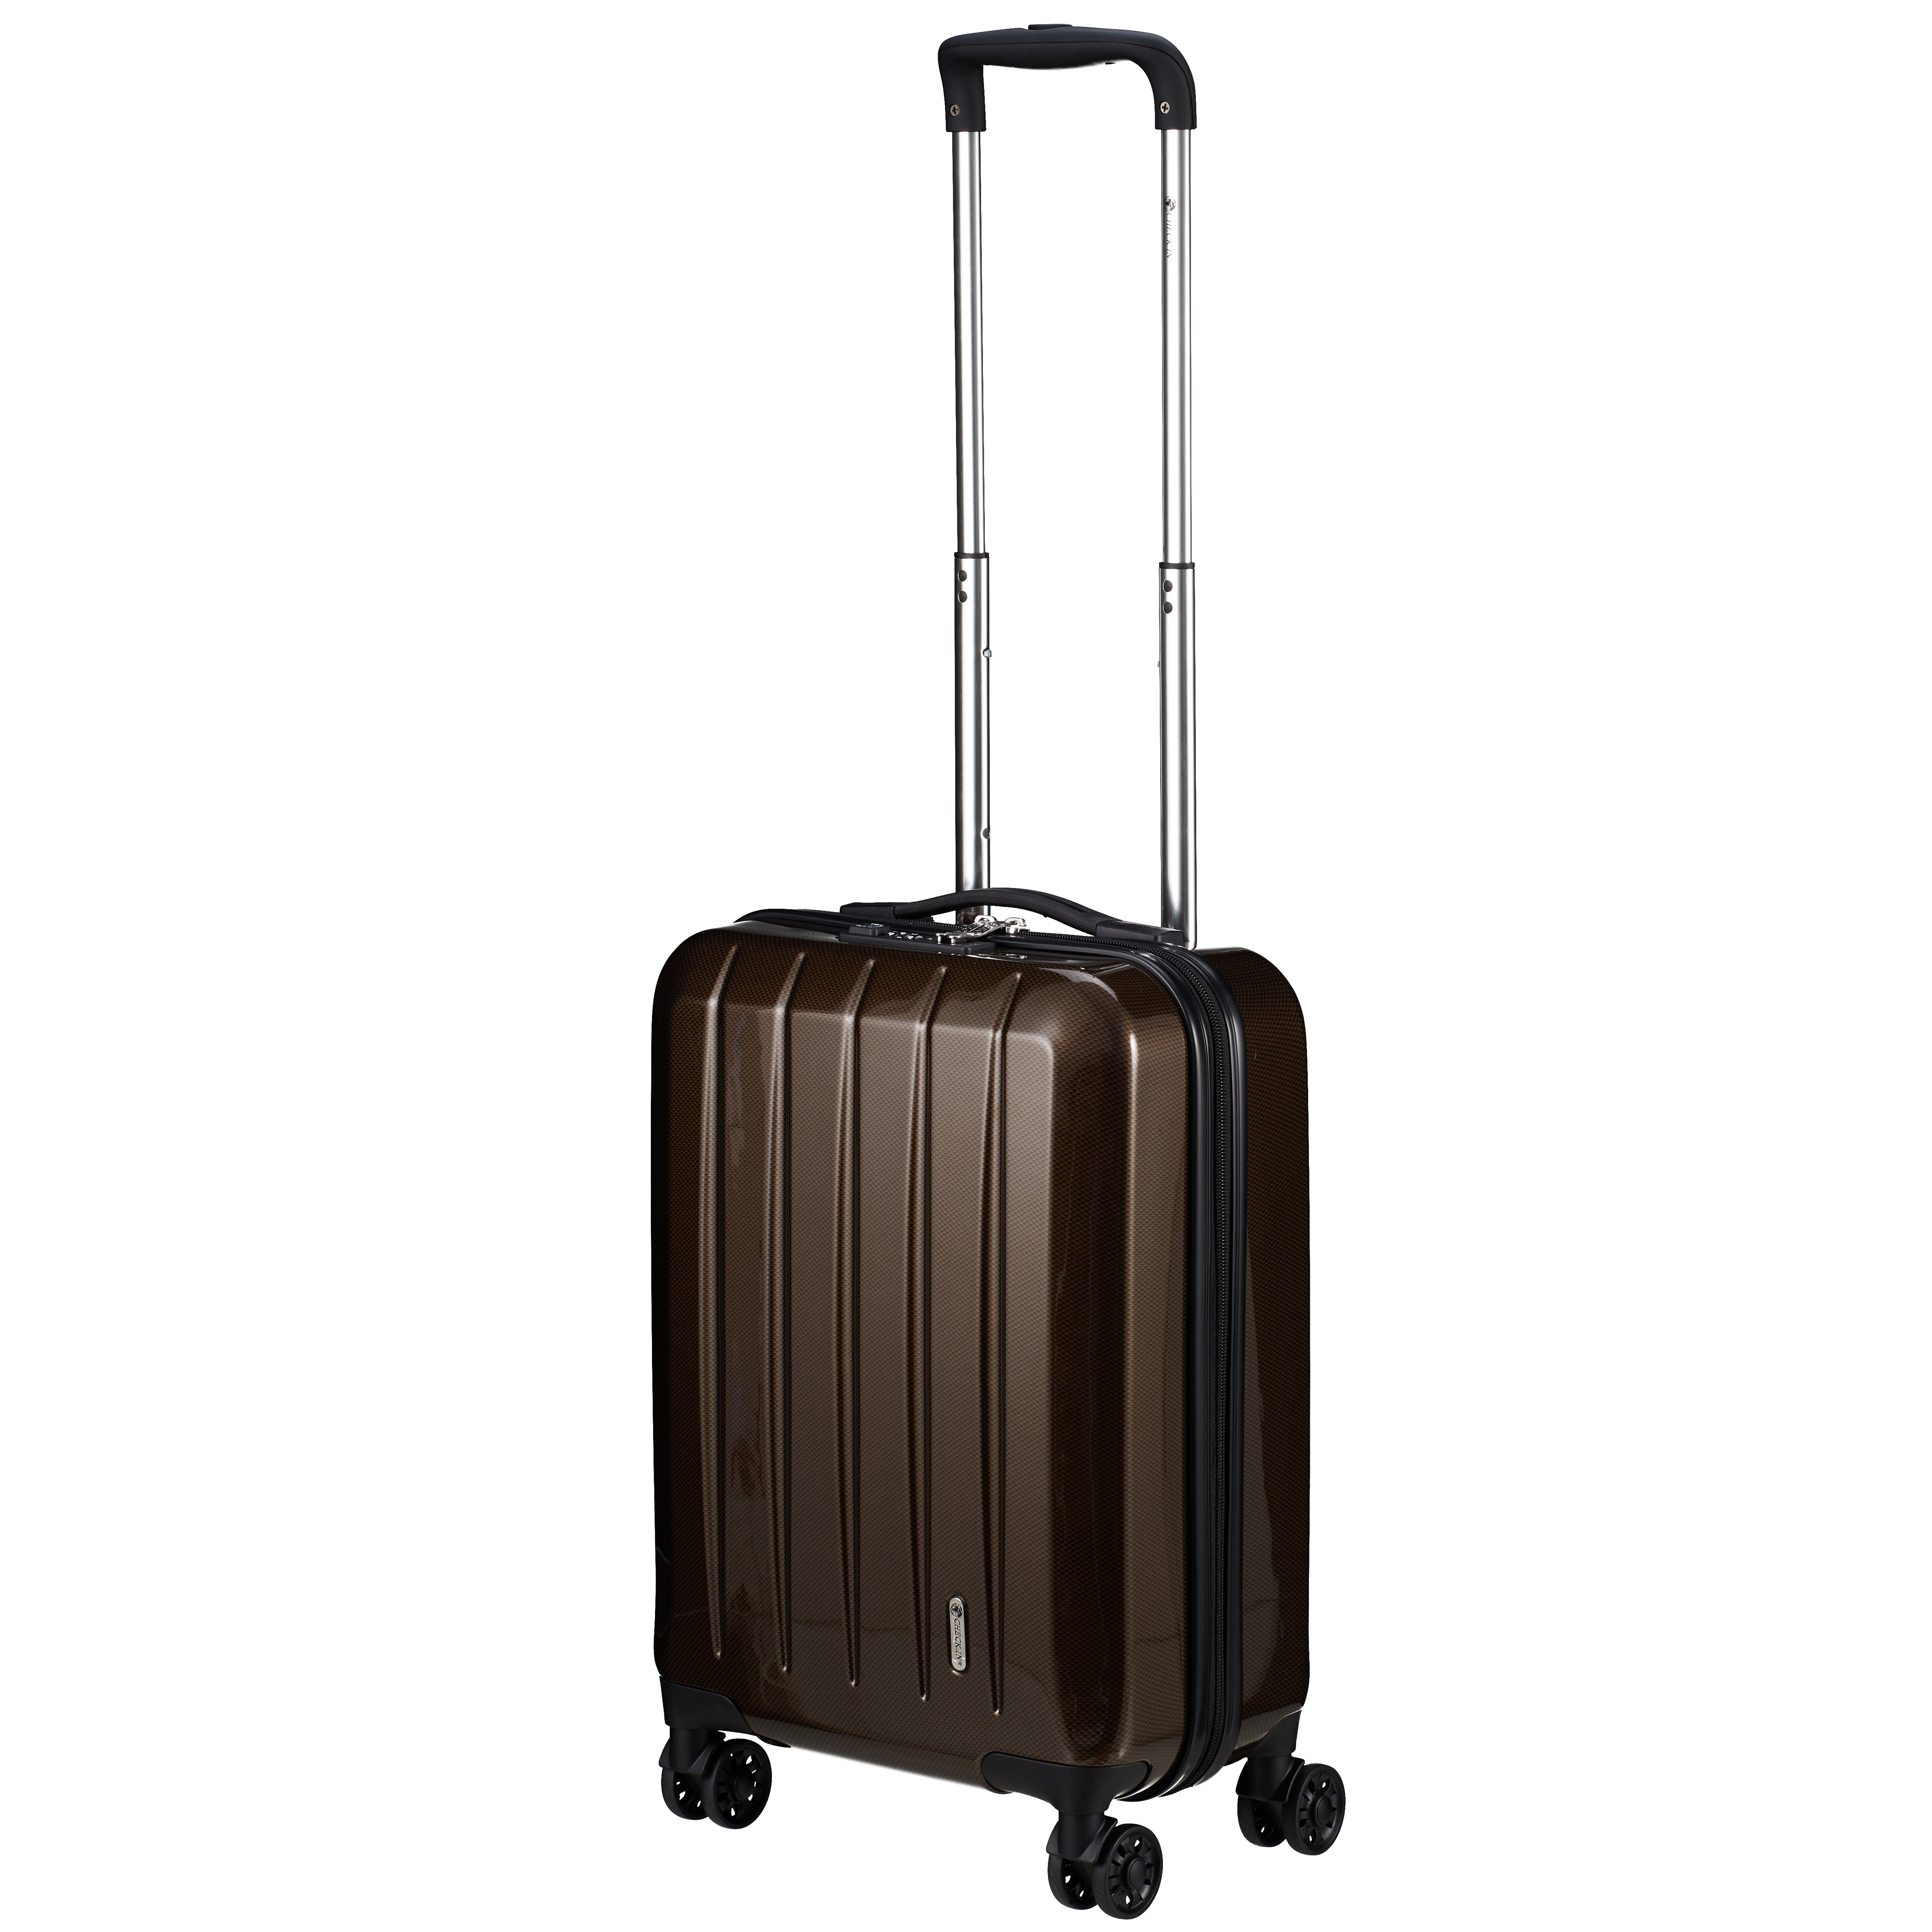 Check In London 2.0 Valise cabine 4 roues 50 cm - Champagne